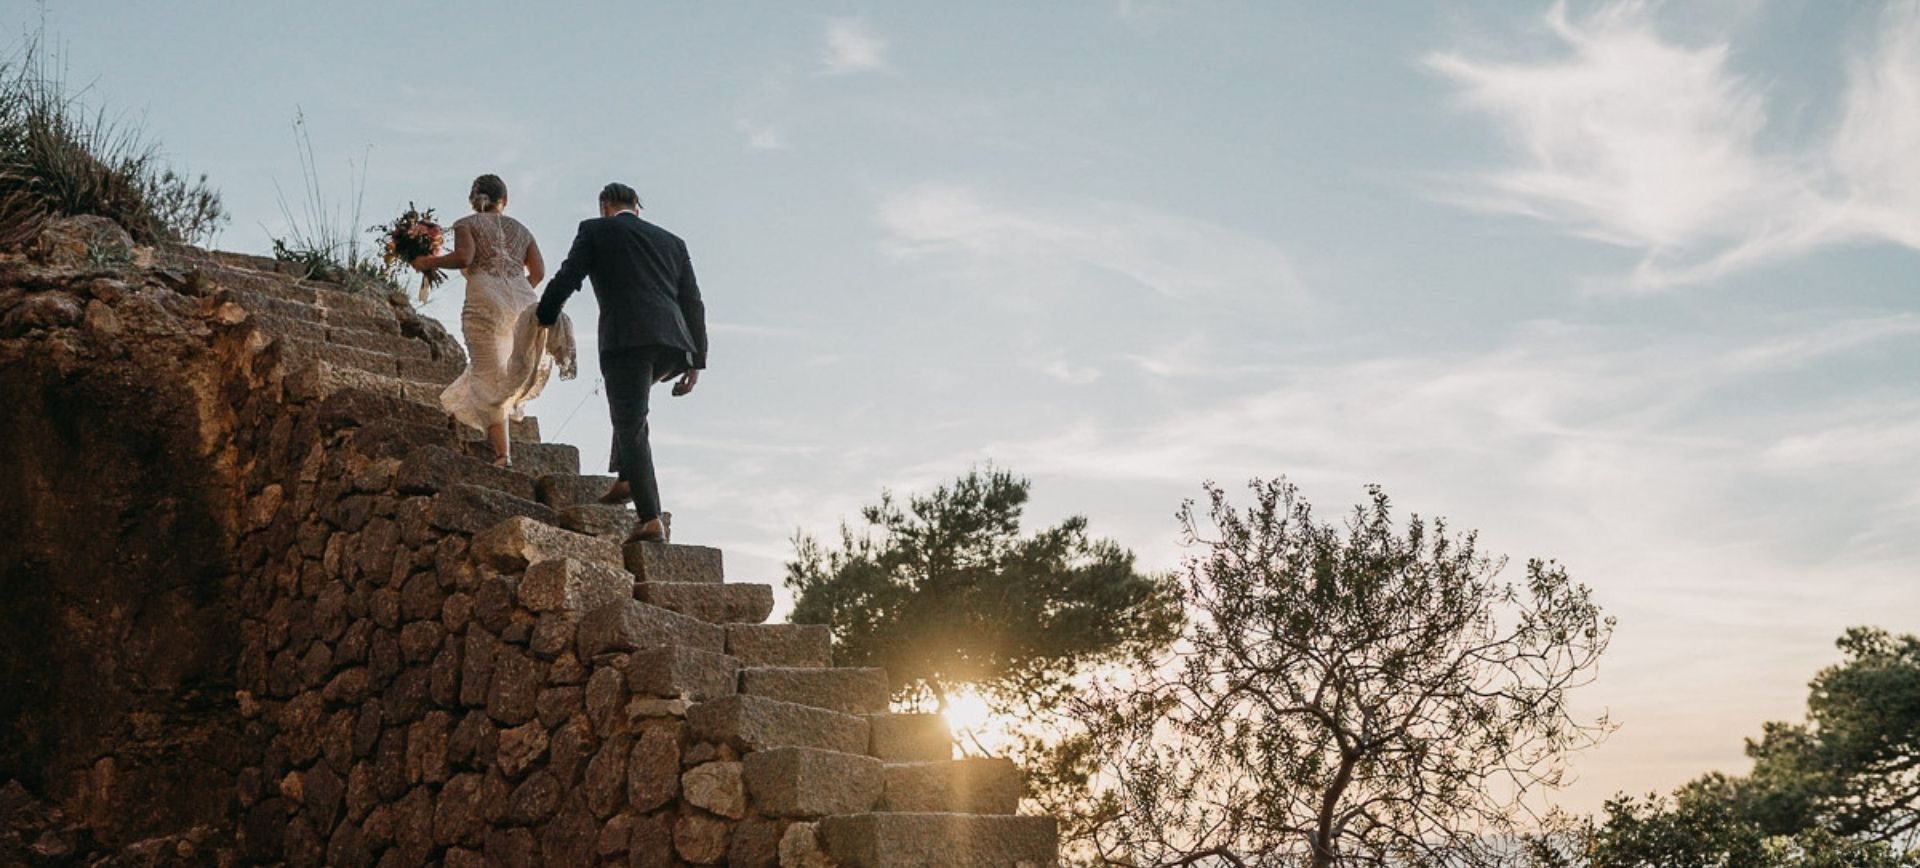 mallorca elopement photographer - adventure wedding in mallorca - groom walking up natural stairs to wedding ceremony